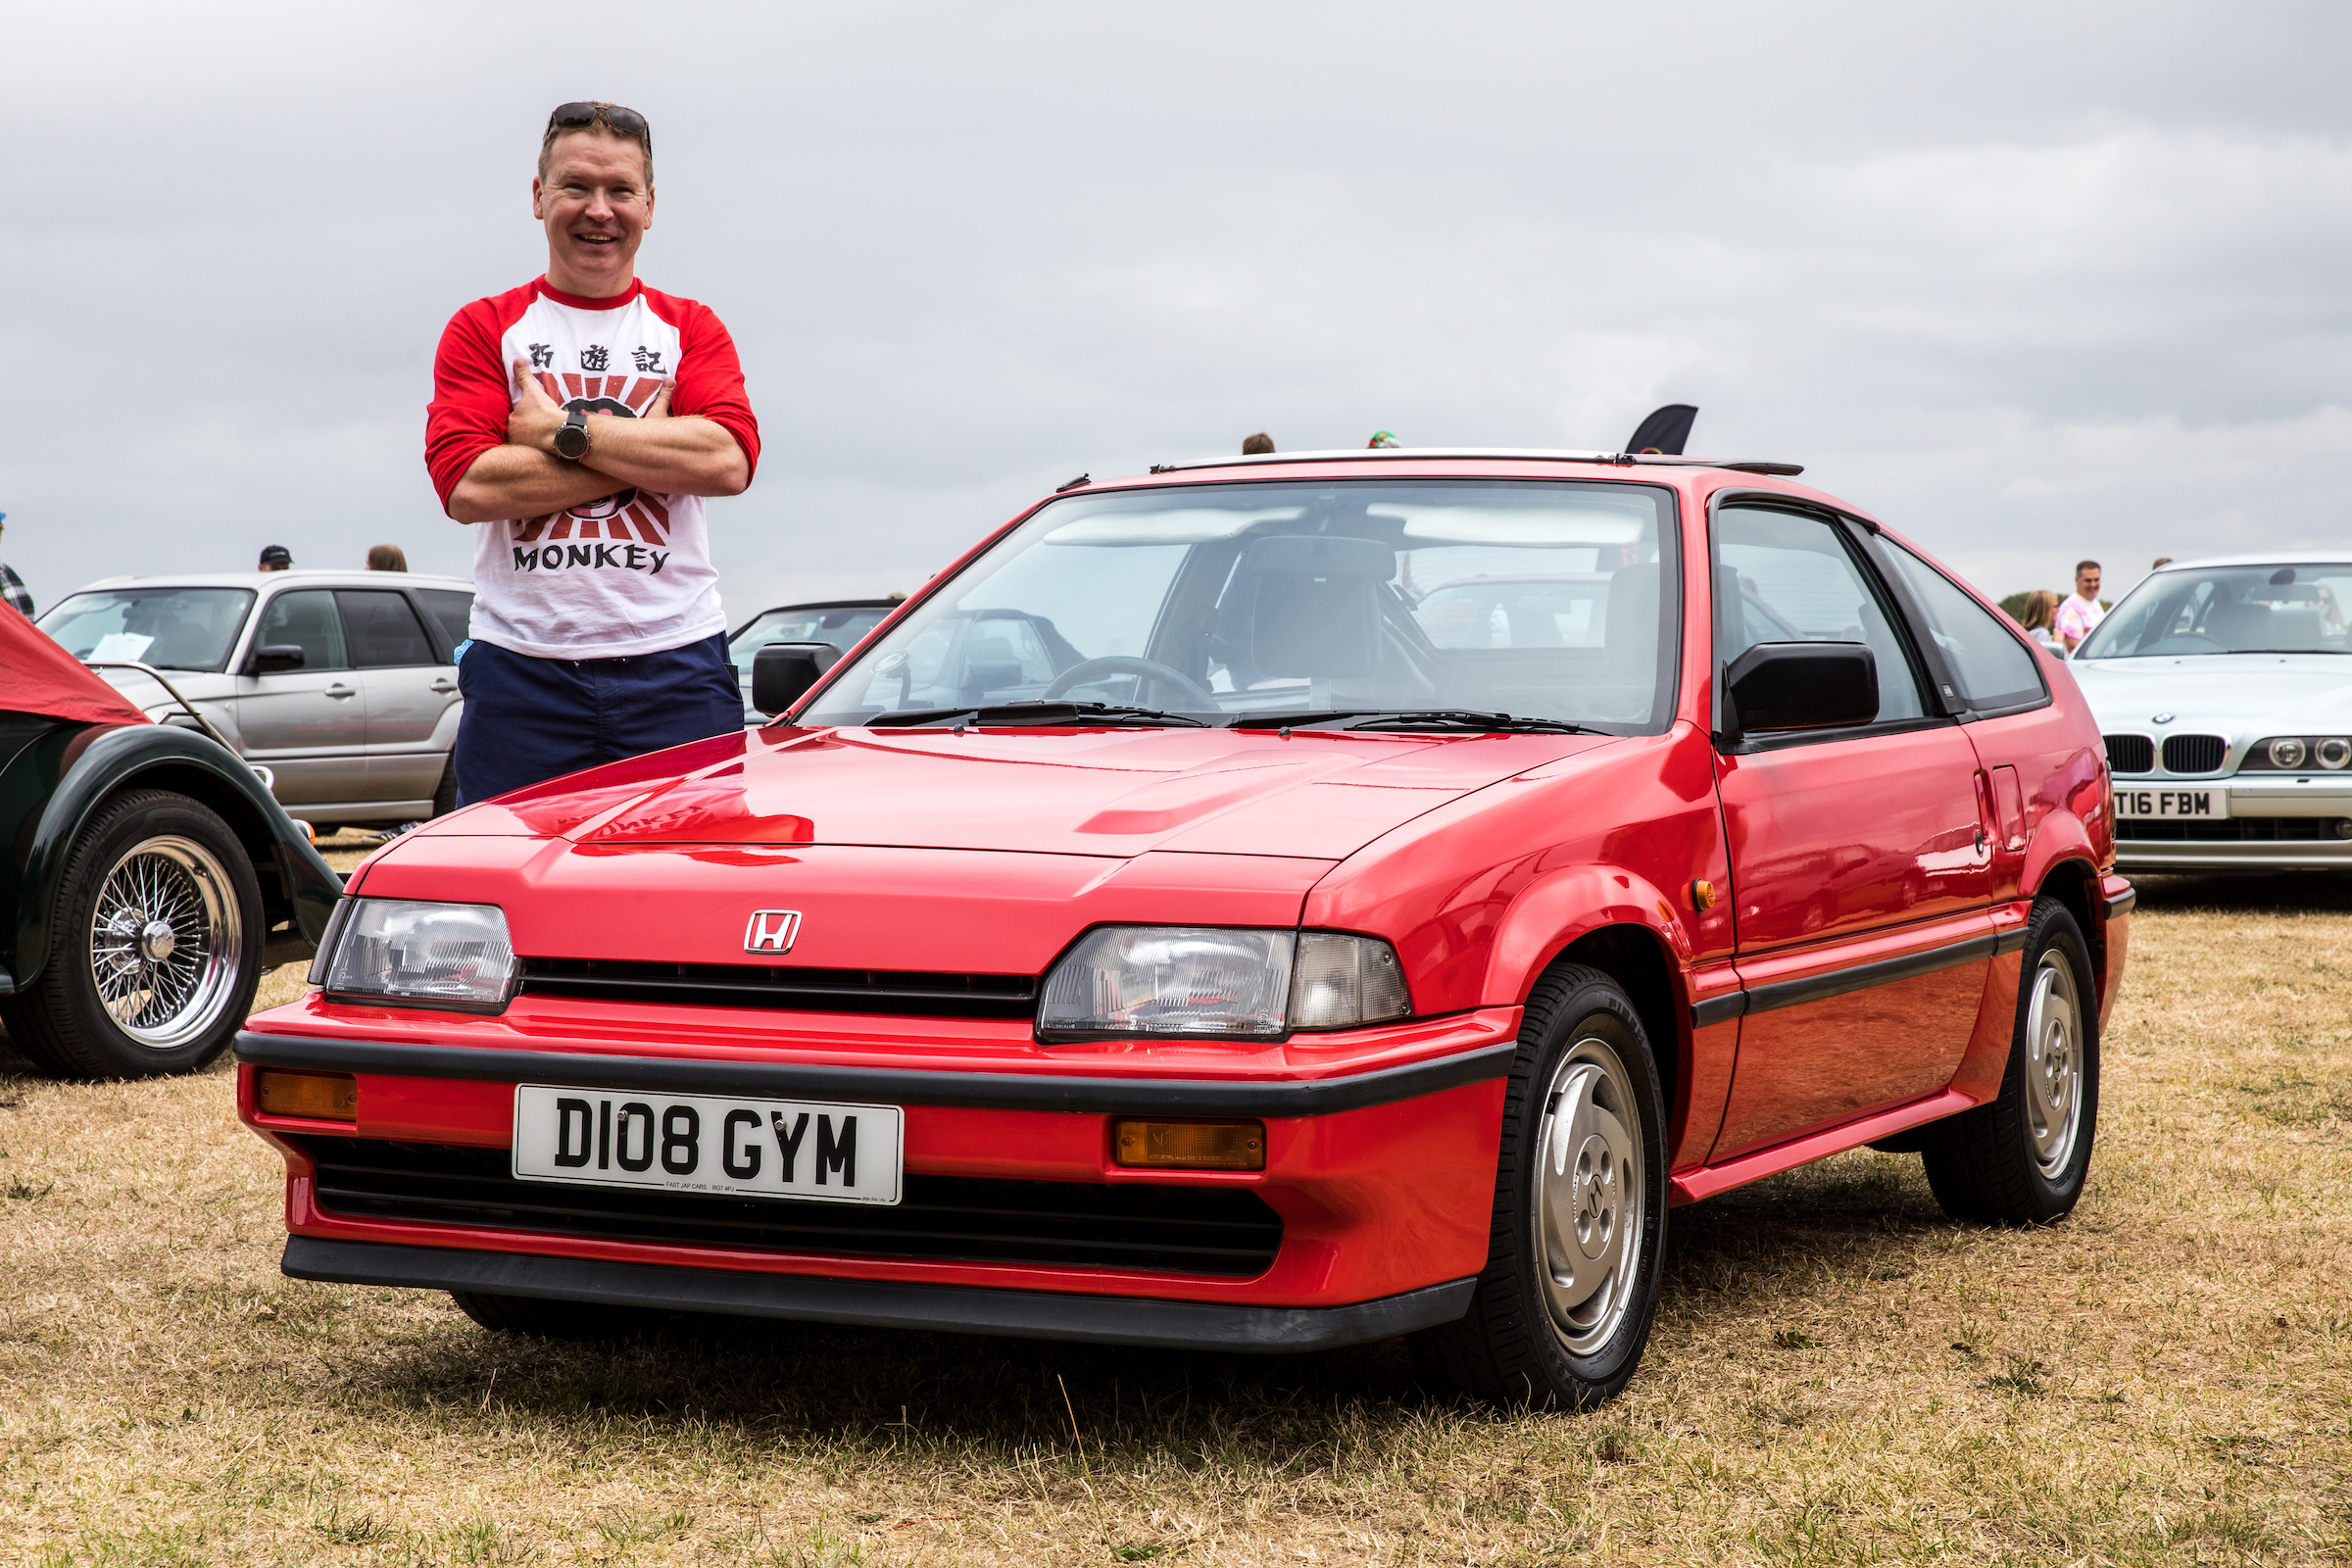 Your Classics: Shaun Carter and the Honda CRX he bought to relive his youth